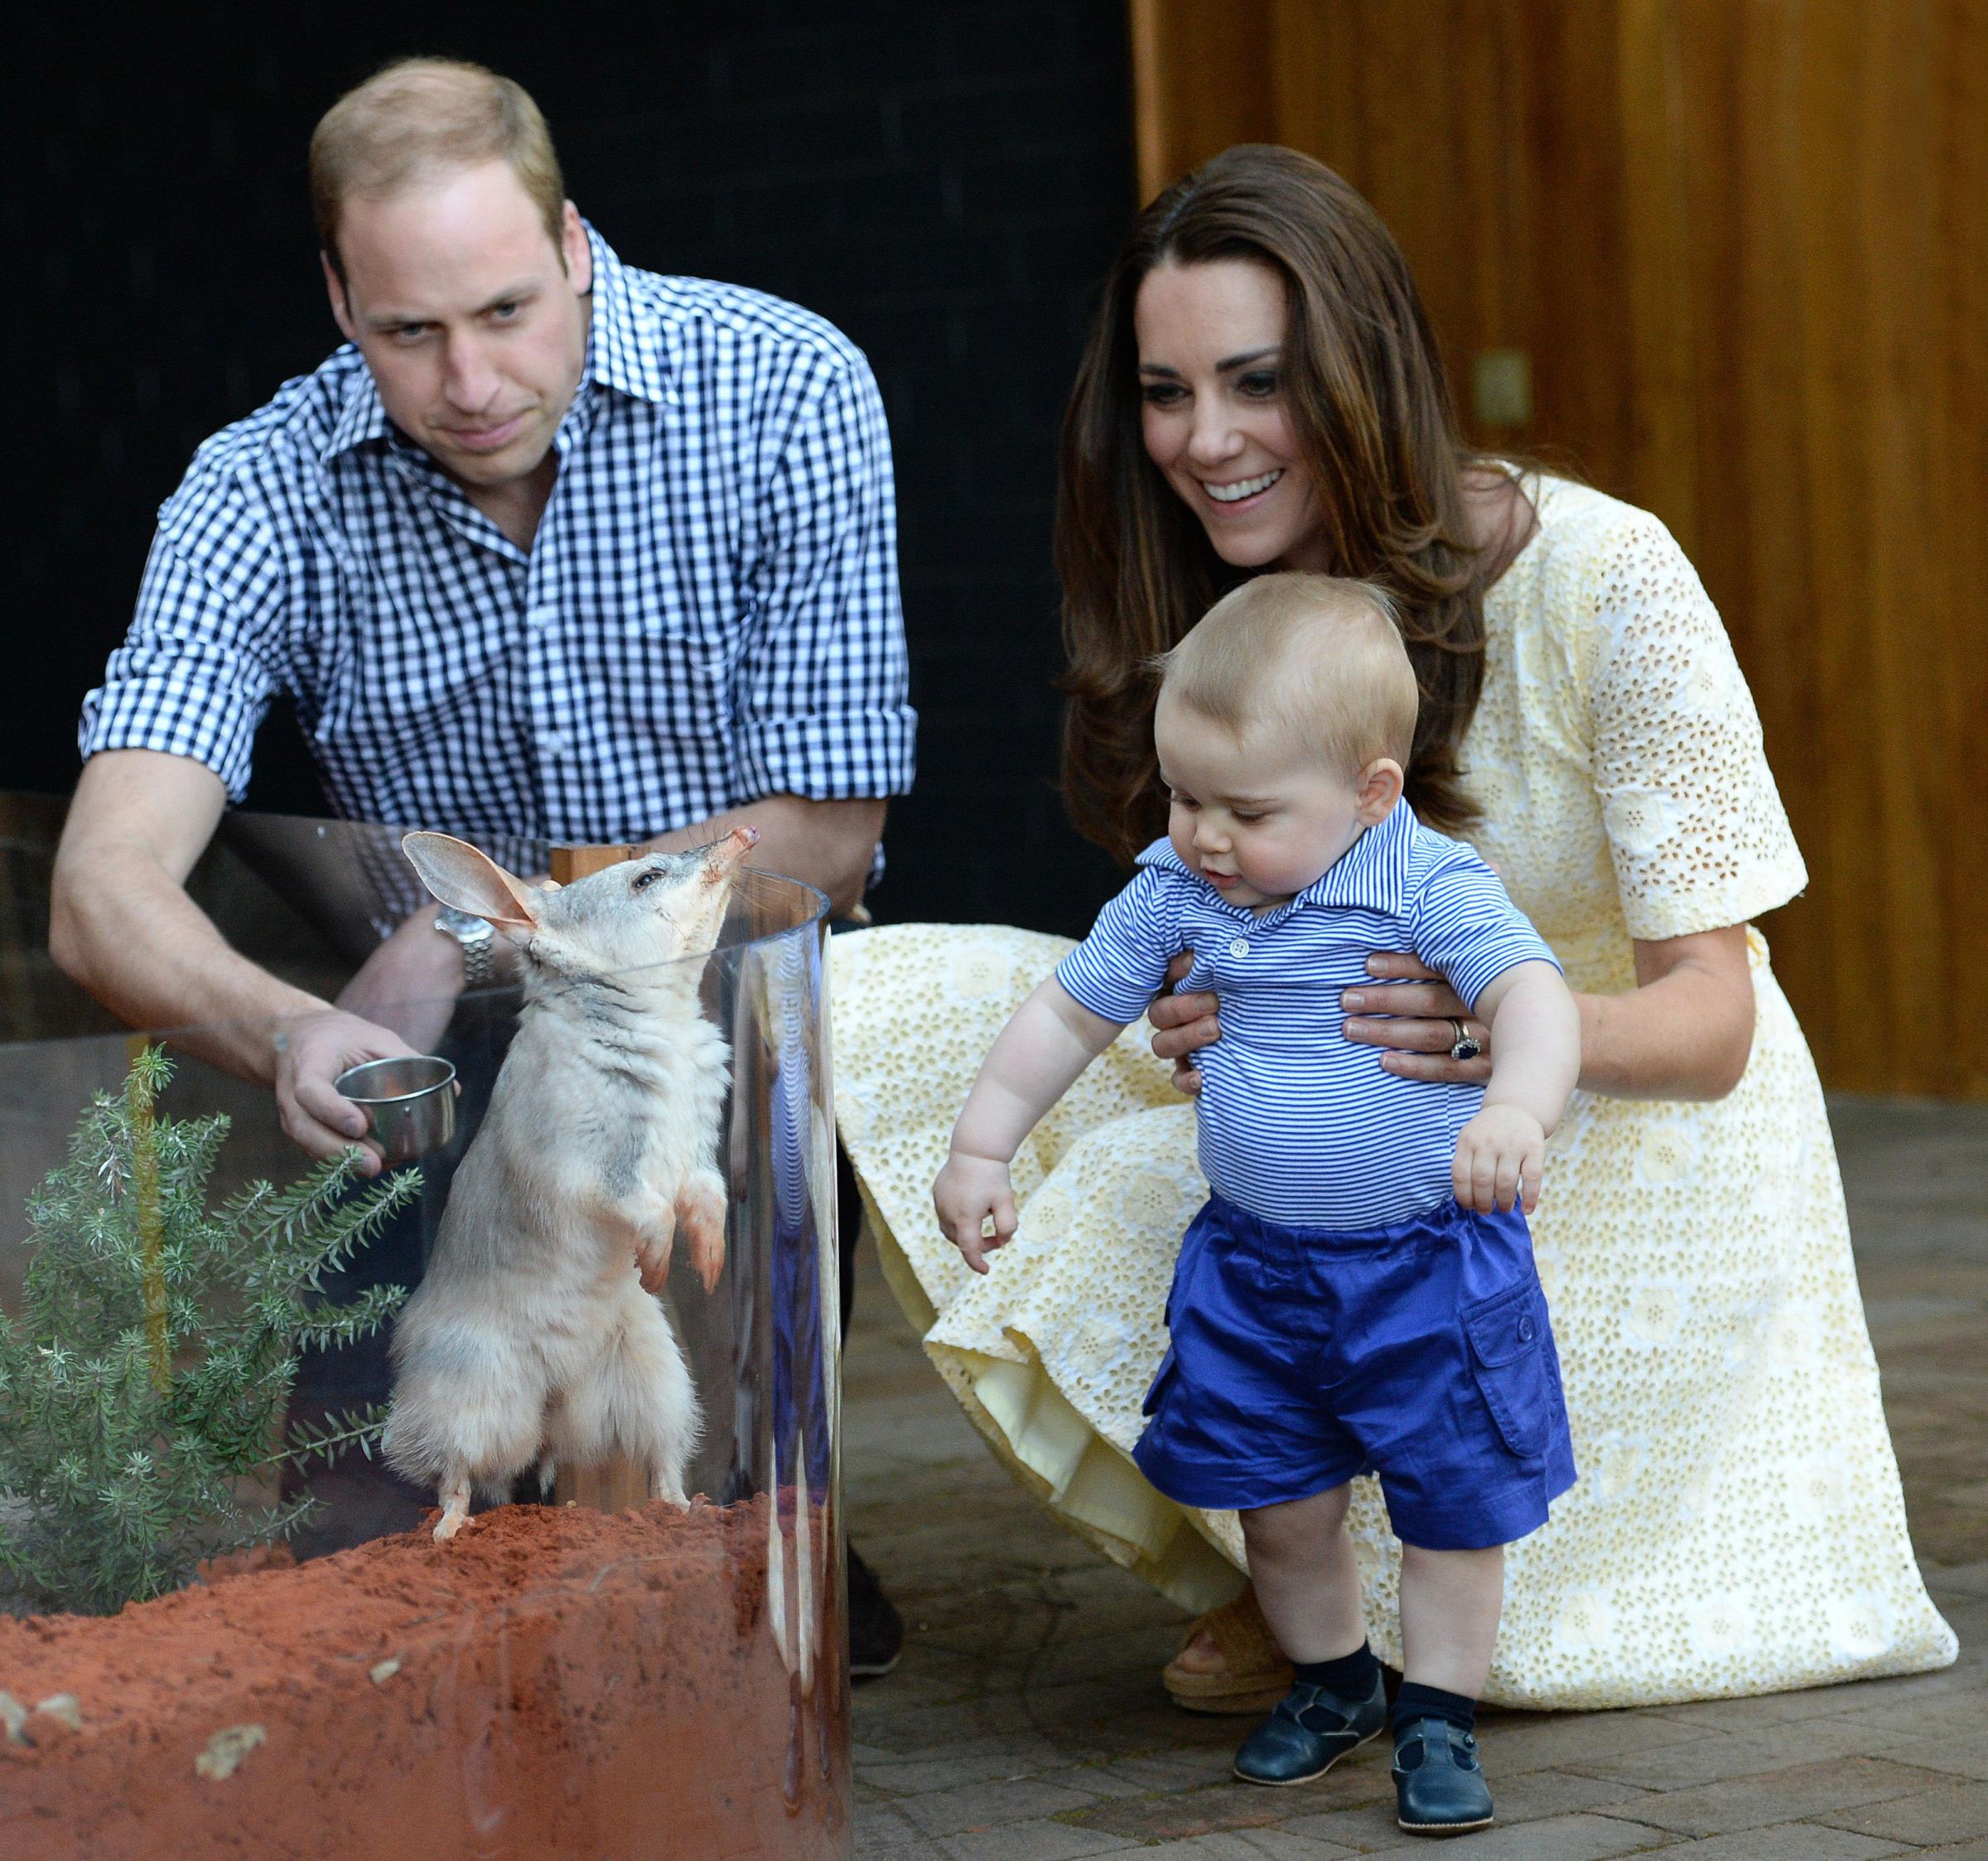 From left: Prince William, Duke of Cambridge and Catherine, Duchess of Cambridge along with baby Prince George visit Taronga Zoo on April 20, 2014 in Sydney.